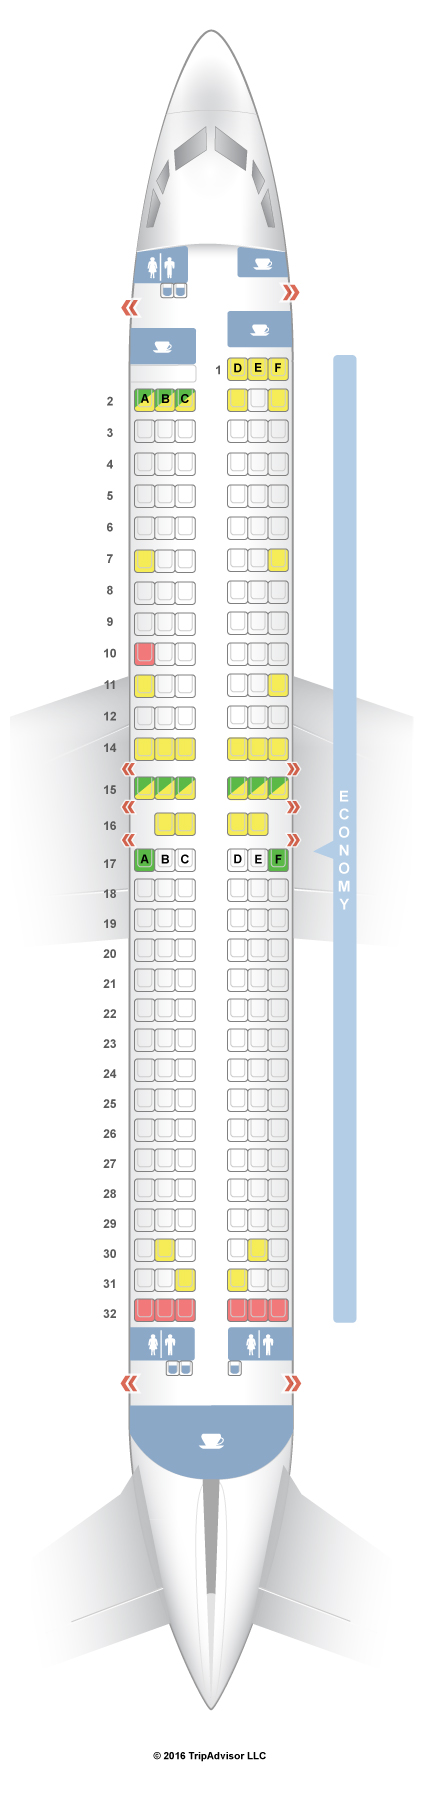 Boeing 737 800 Seating Chart